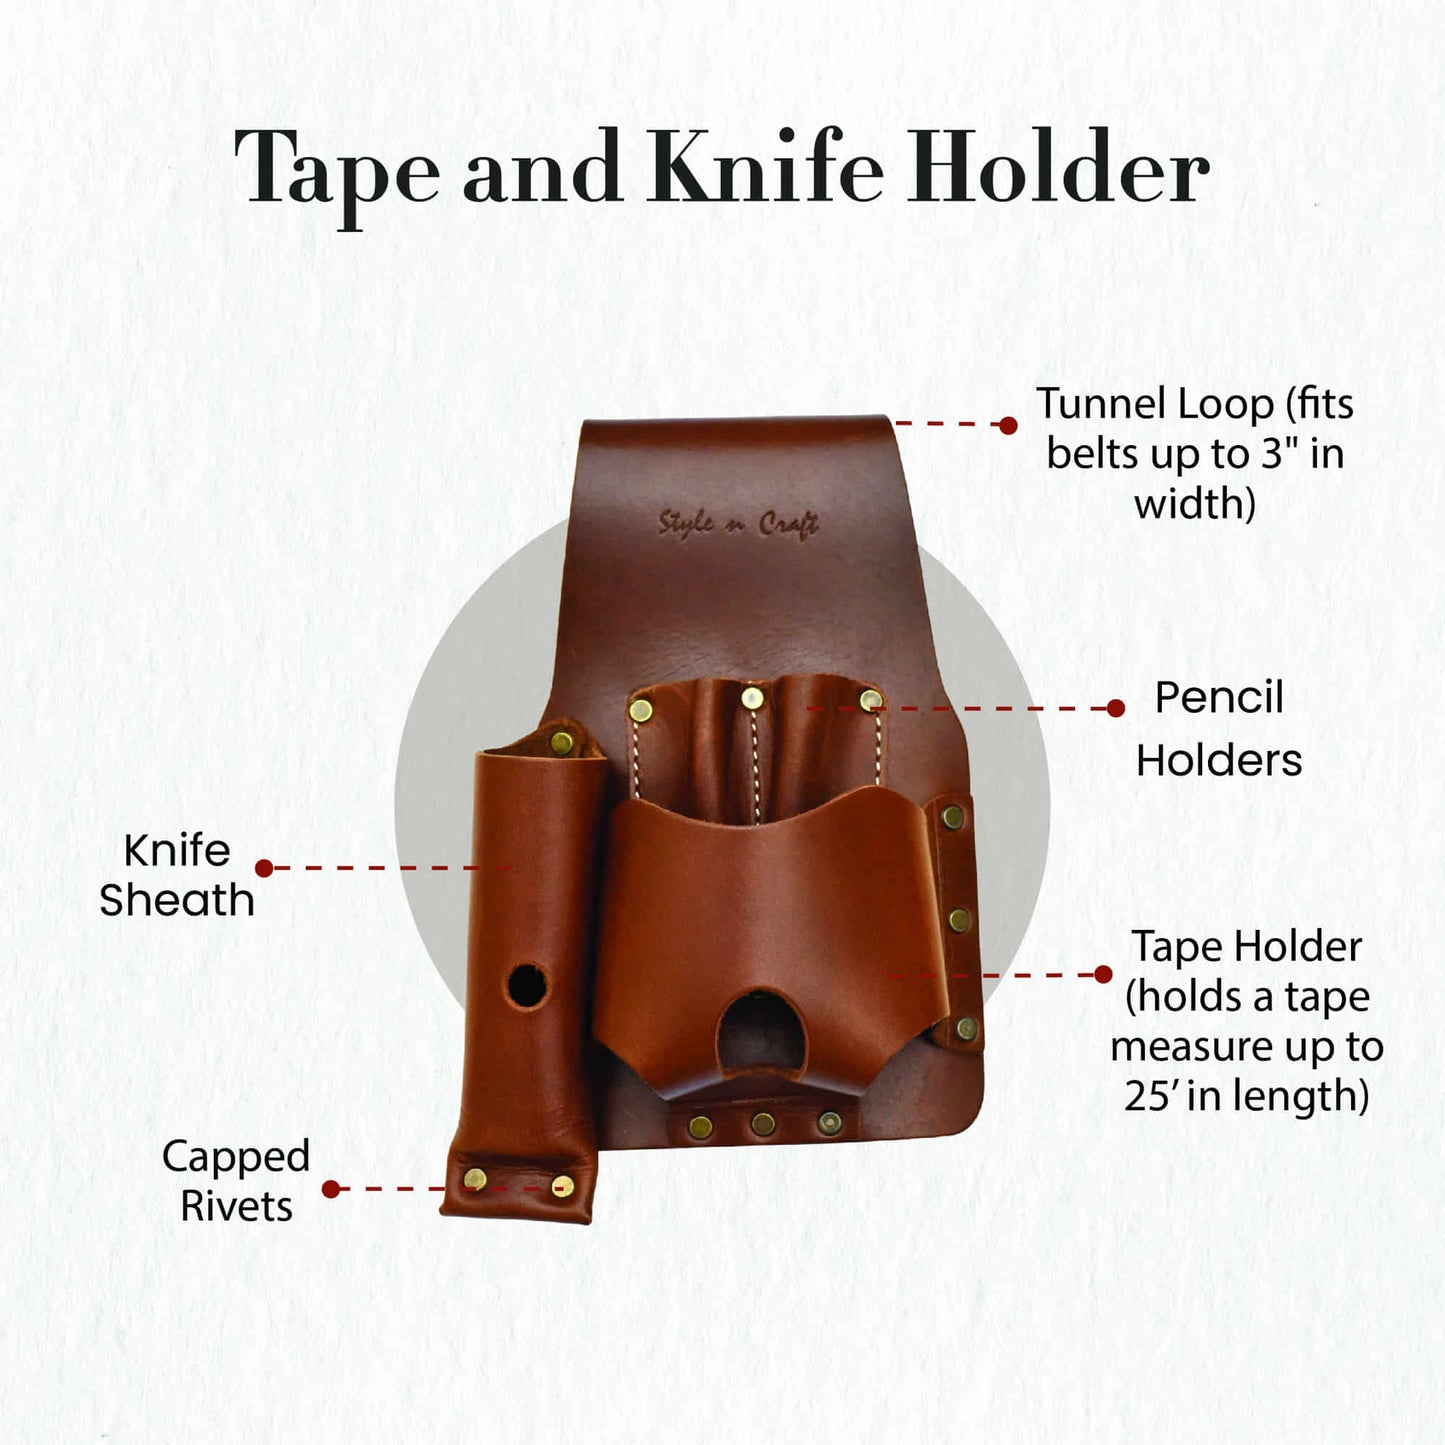 Style n Craft 98015 Tape and Knife Holder in Heavy Full Grain Leather in Dark Tan Color - Front View Showing the Details